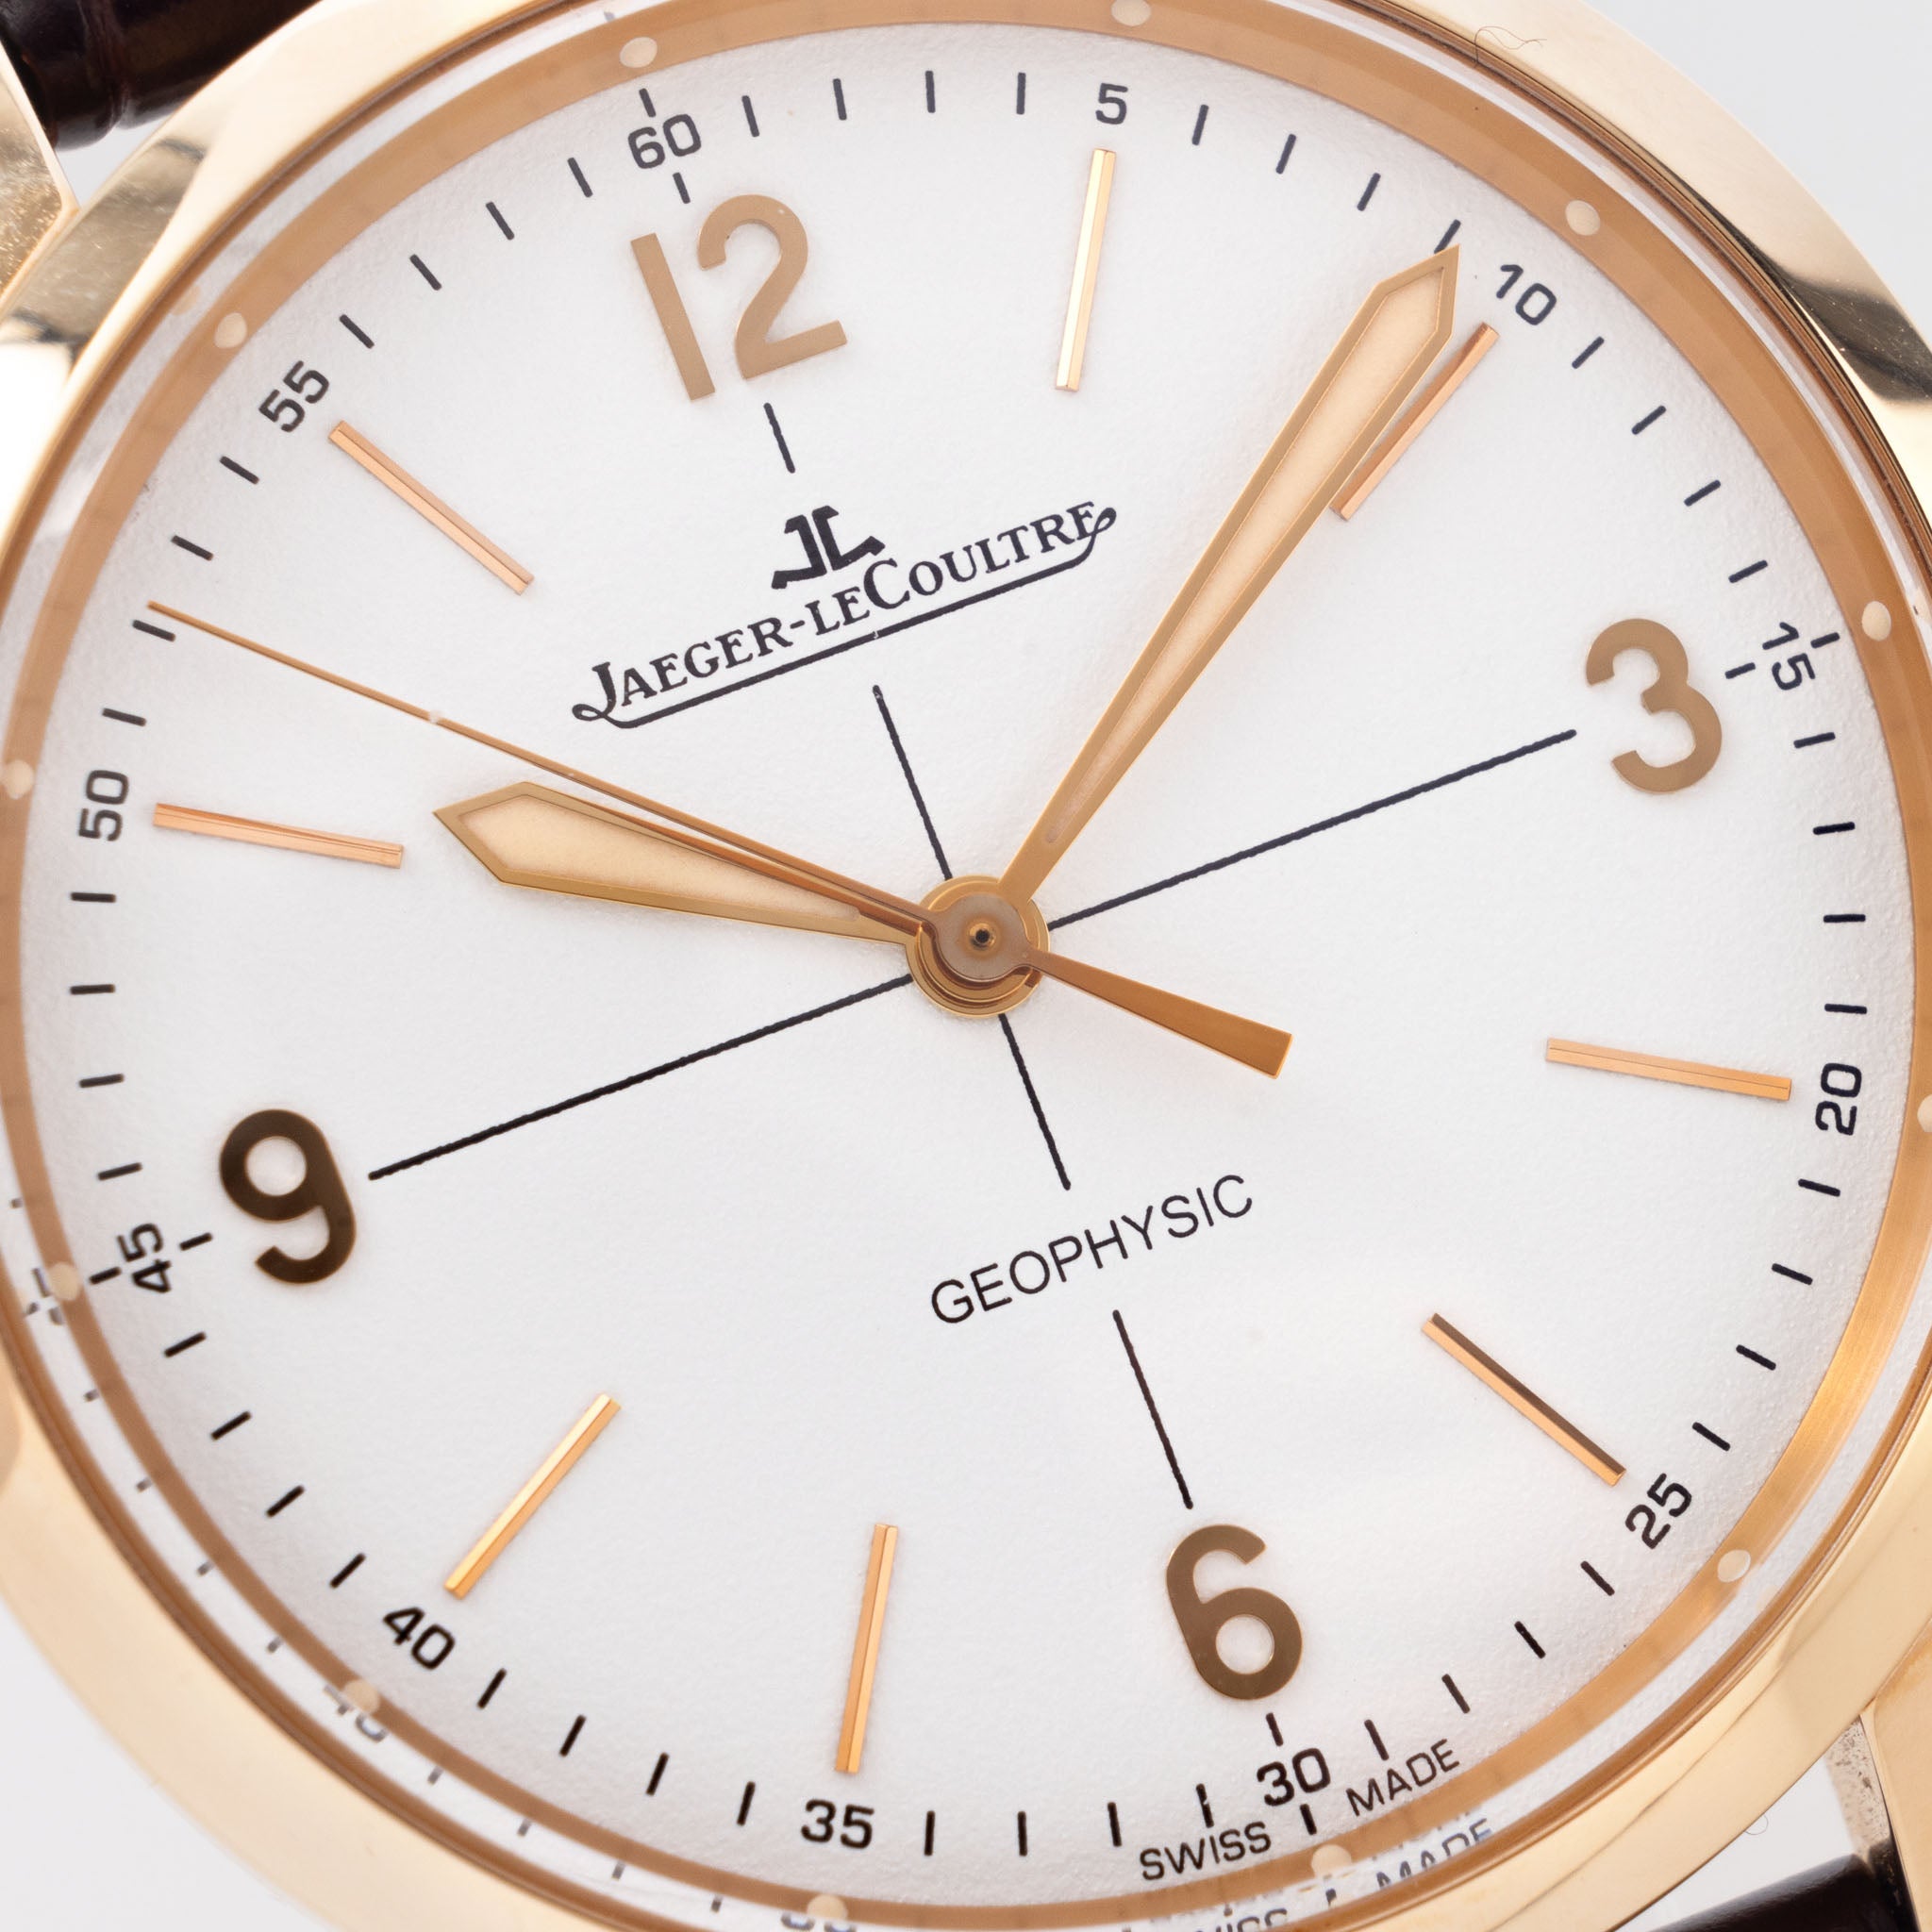 Jaeger-LeCoultre Geophysic 1958 Rose Gold with Box and Papers Ref JL Q8002520 